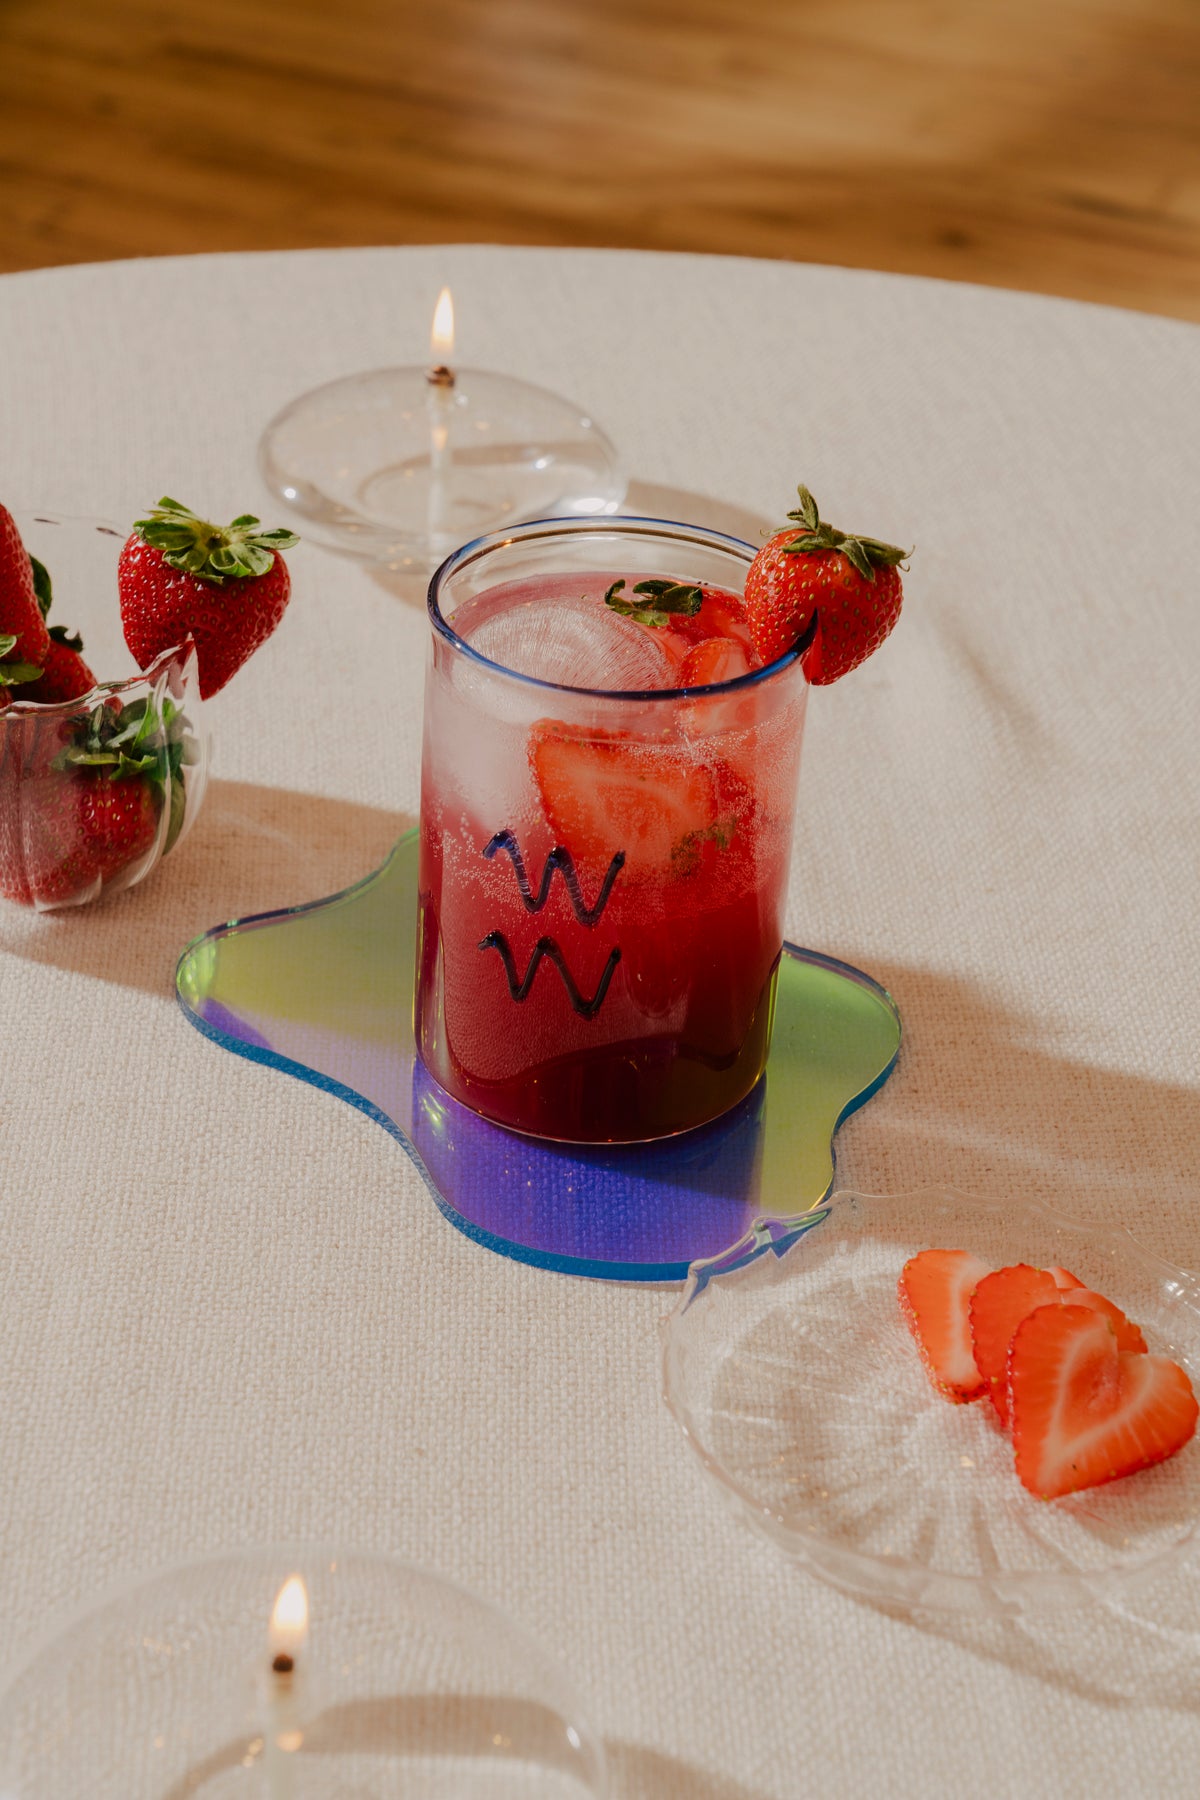 A refreshing  non-alcoholic strawberry spritz in a Sprezz Aquarius Lowball Glass, artistically garnished with a whole strawberry on the rim, sits on a colorful coaster. This vibrant scene is completed with a bowl of fresh strawberries and a lit candle, adding a cozy and inviting ambiance to this elegant table setup.